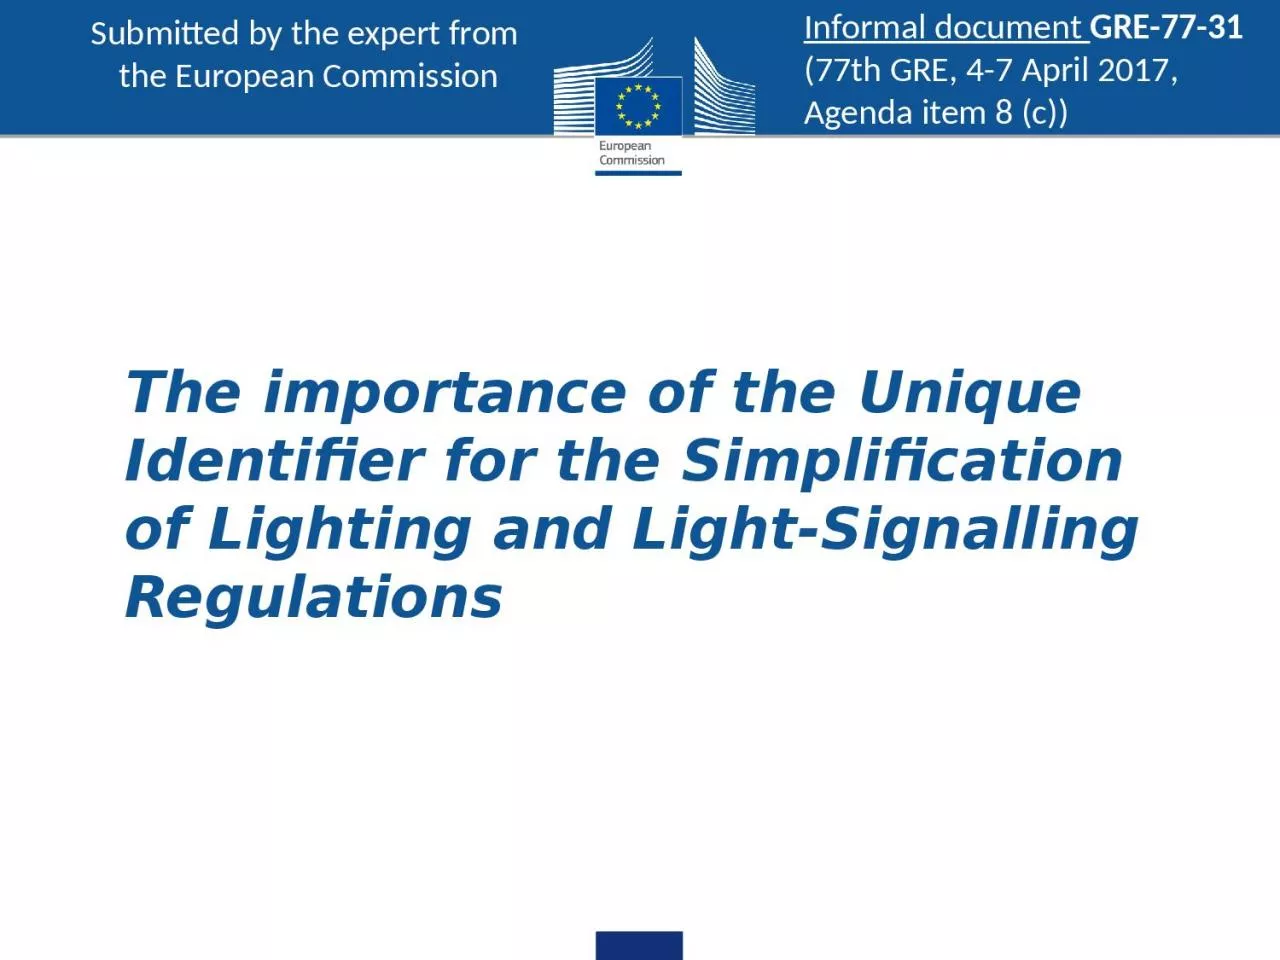 The importance of the Unique Identifier for the Simplification of Lighting and Light-